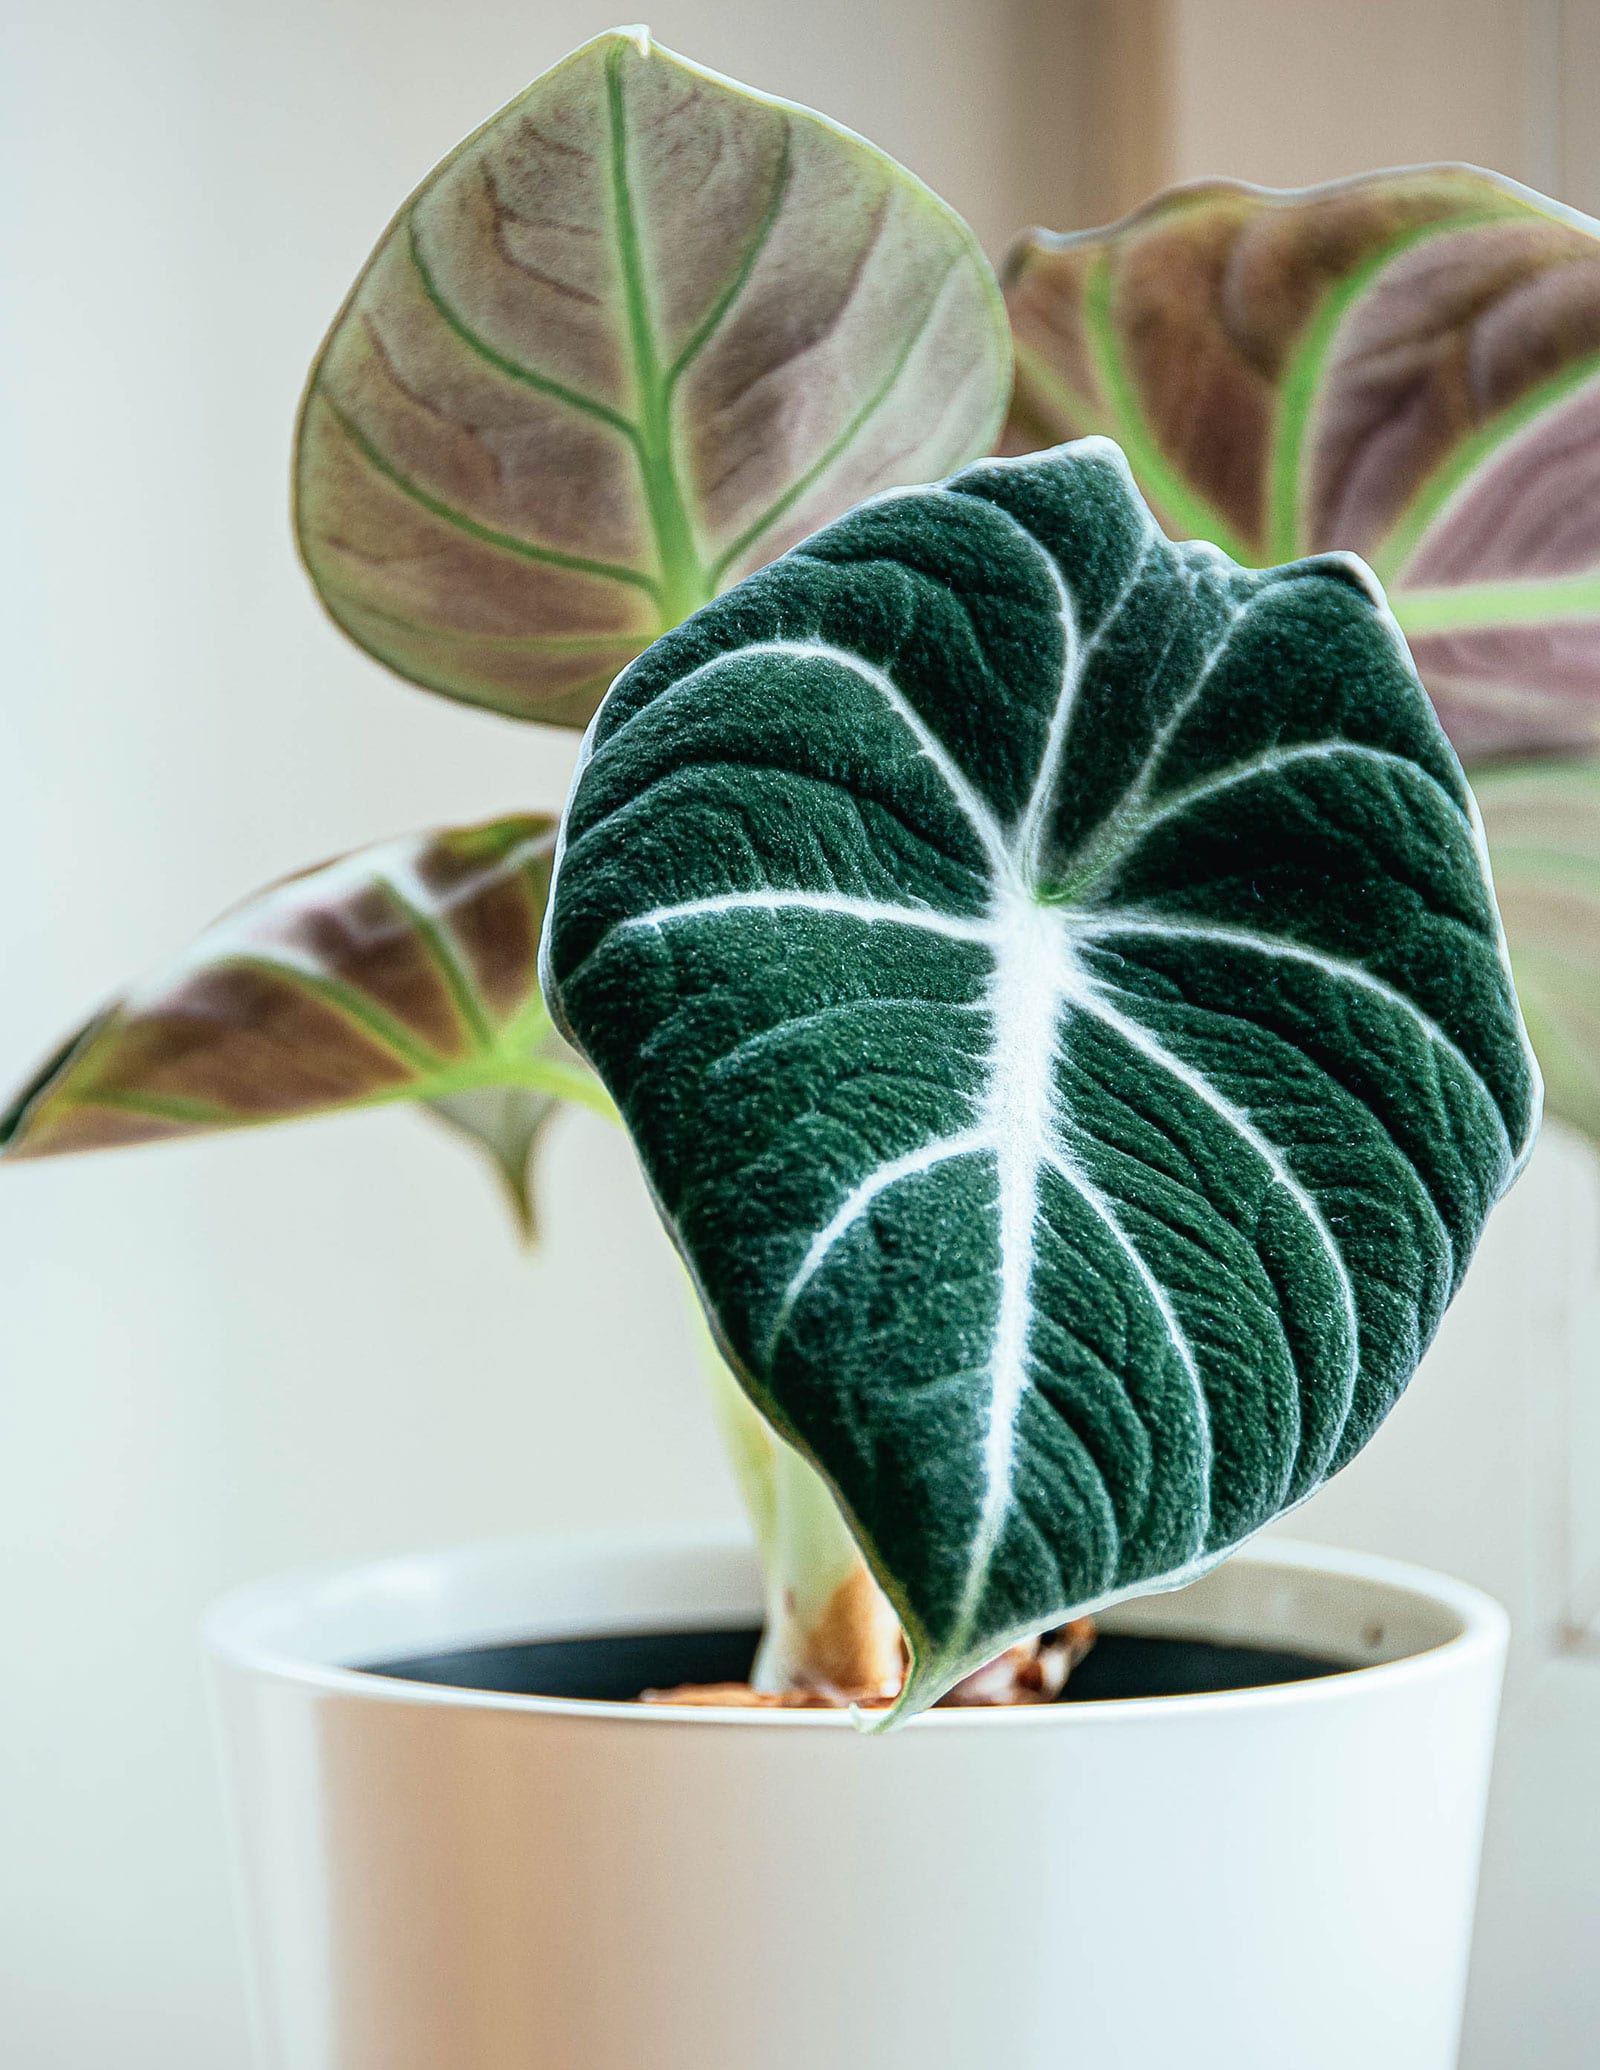 Alocasia reginula 'Black Velvet' plant featuring deep green leaves with white midribs